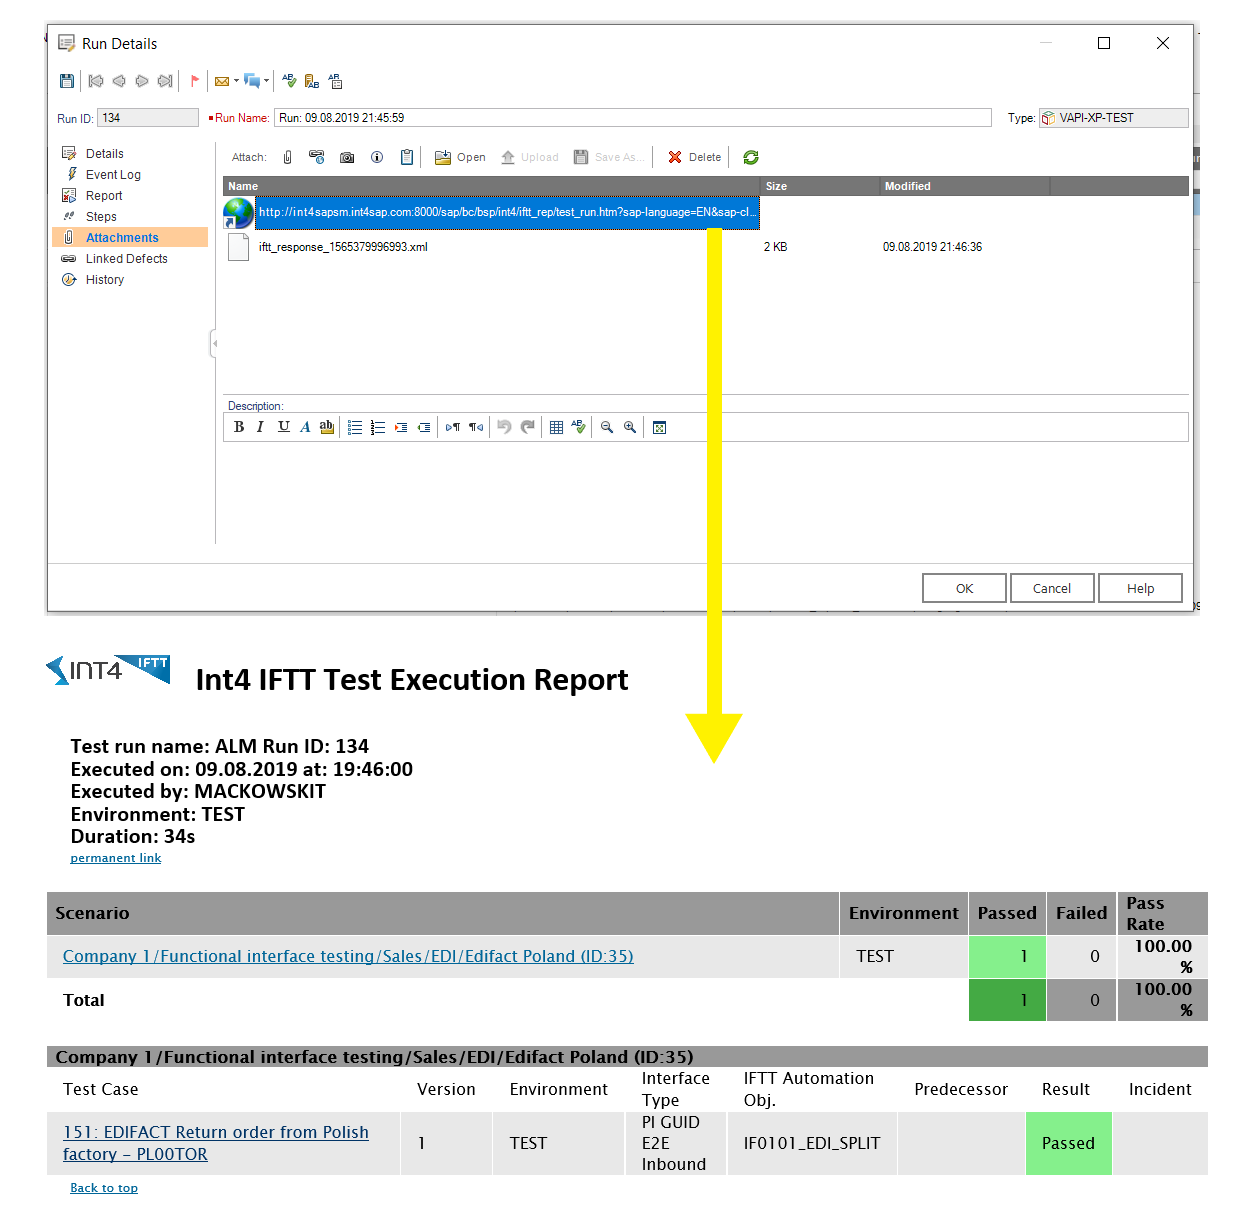 Int4 IFTT Test Execution Report